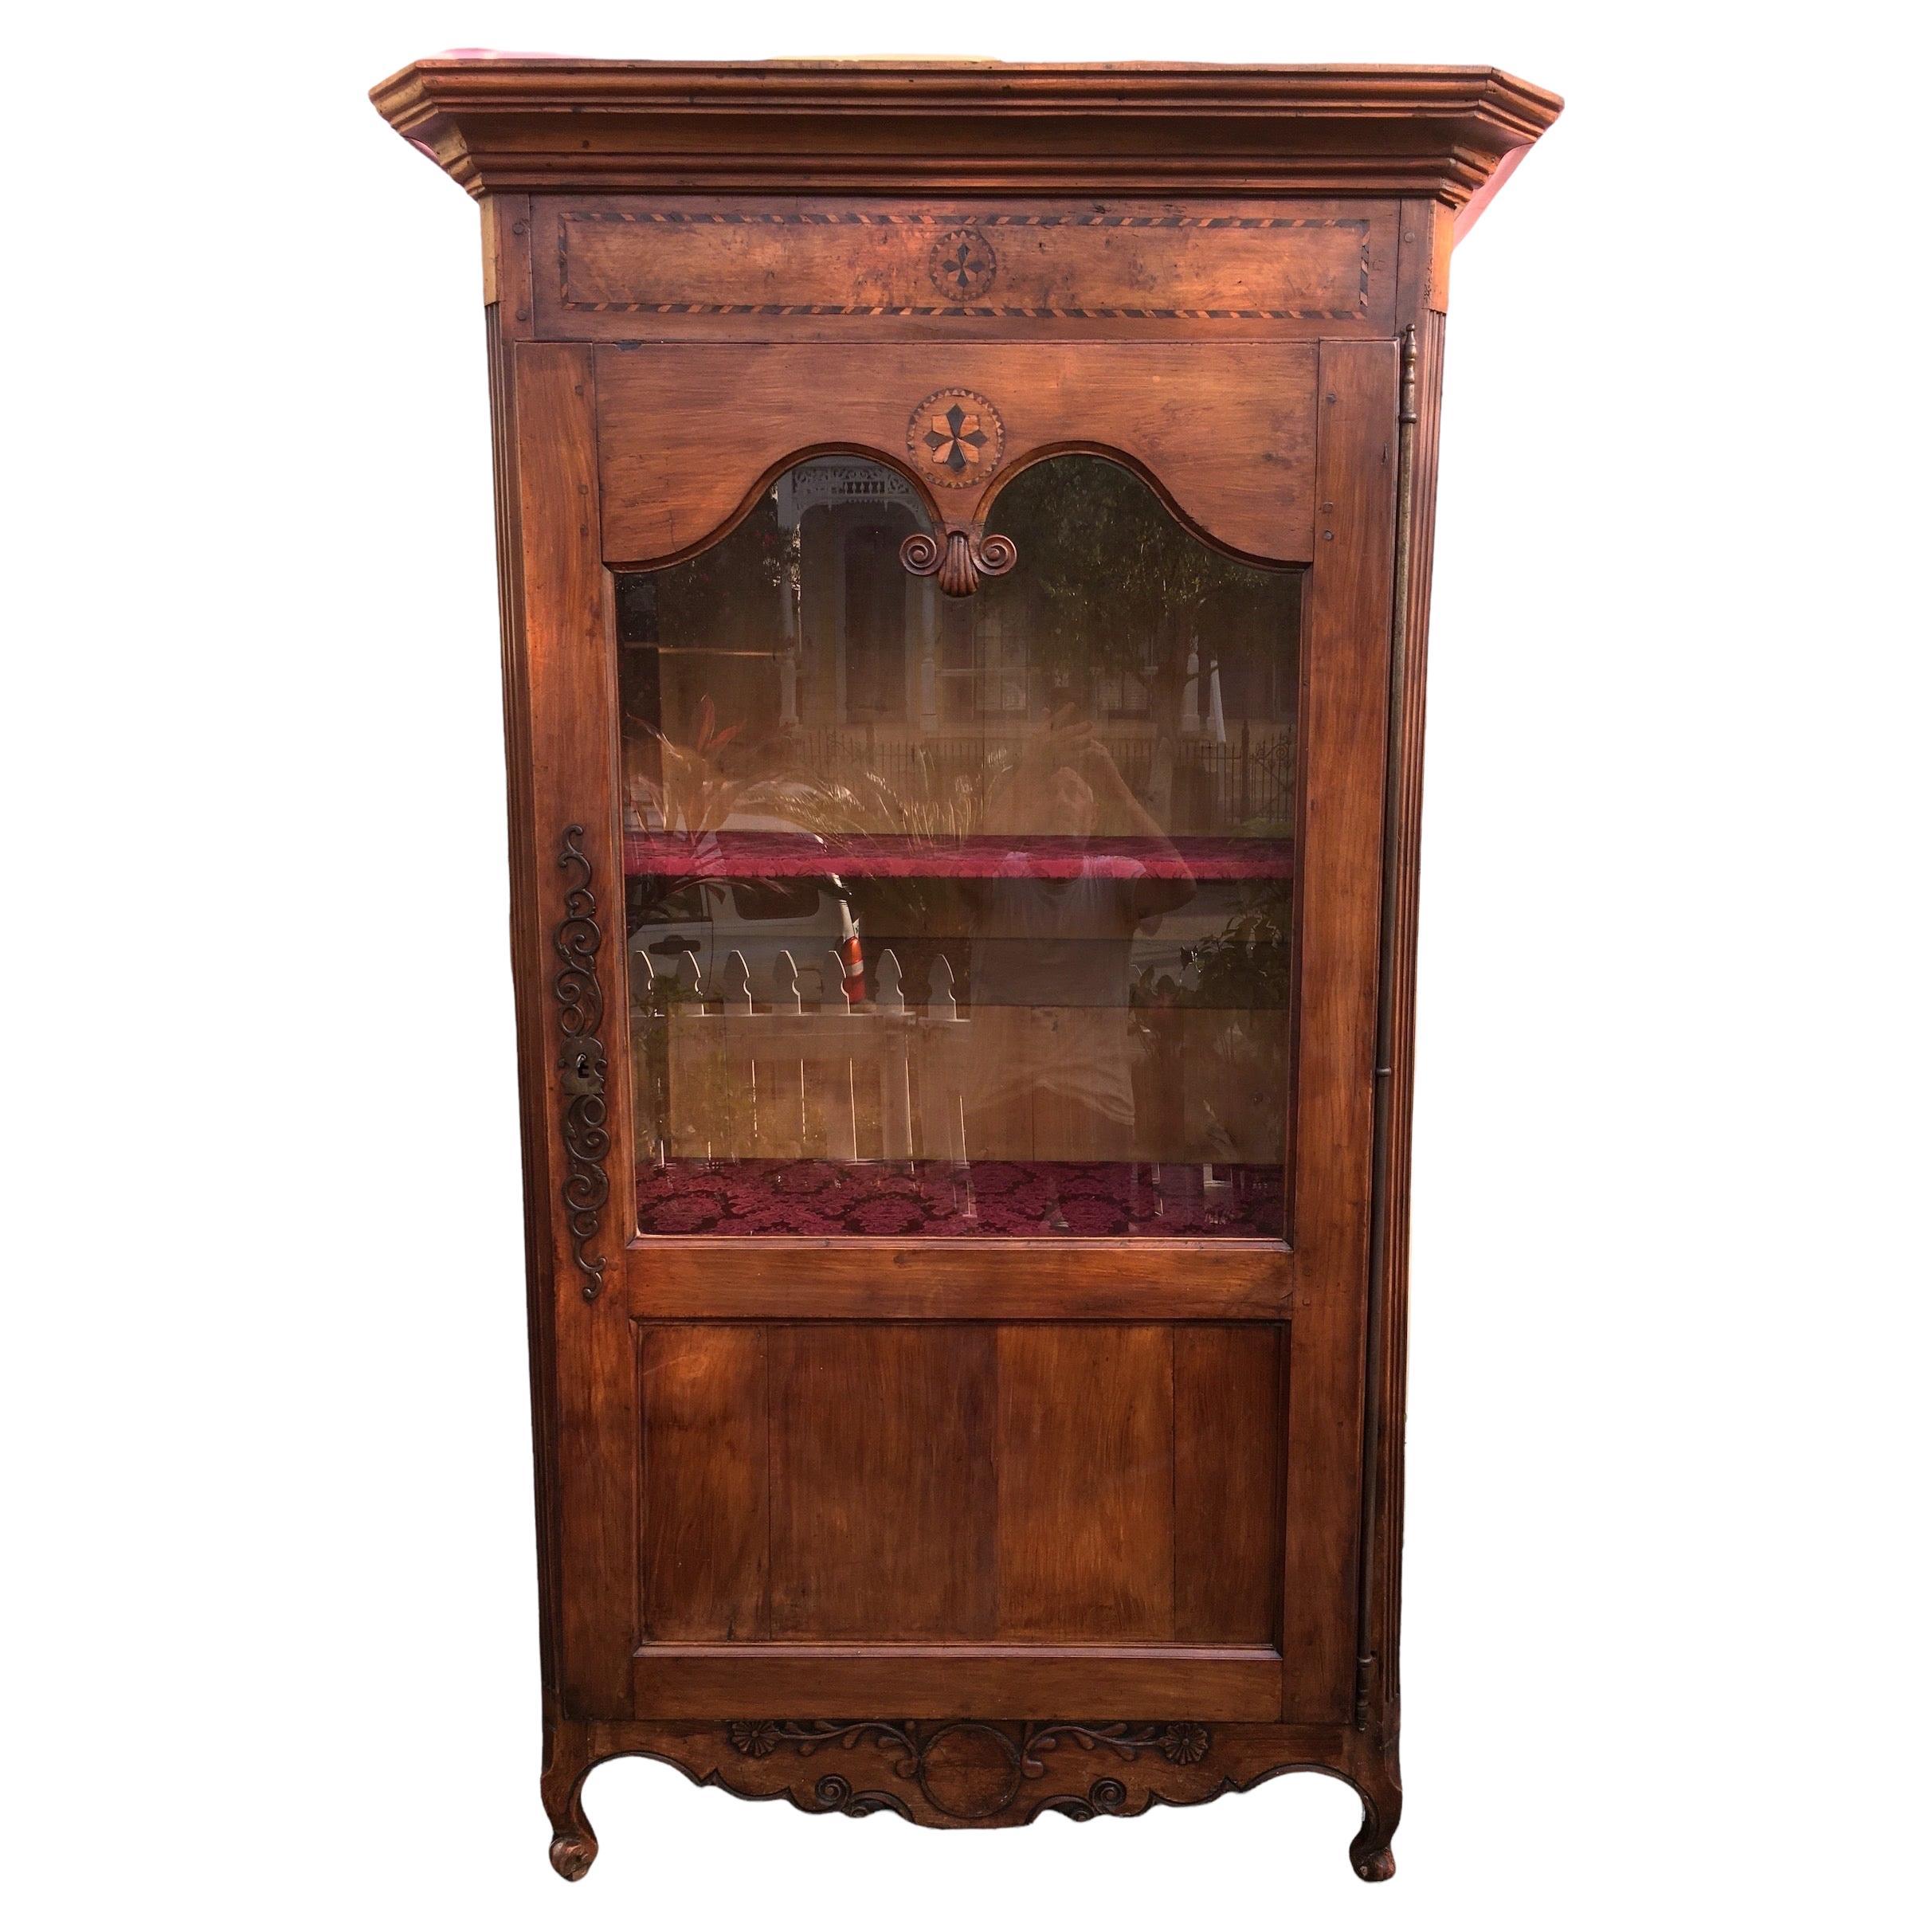 Antique Early 19th Century French Carved and Inlaid Cherry Vitrine